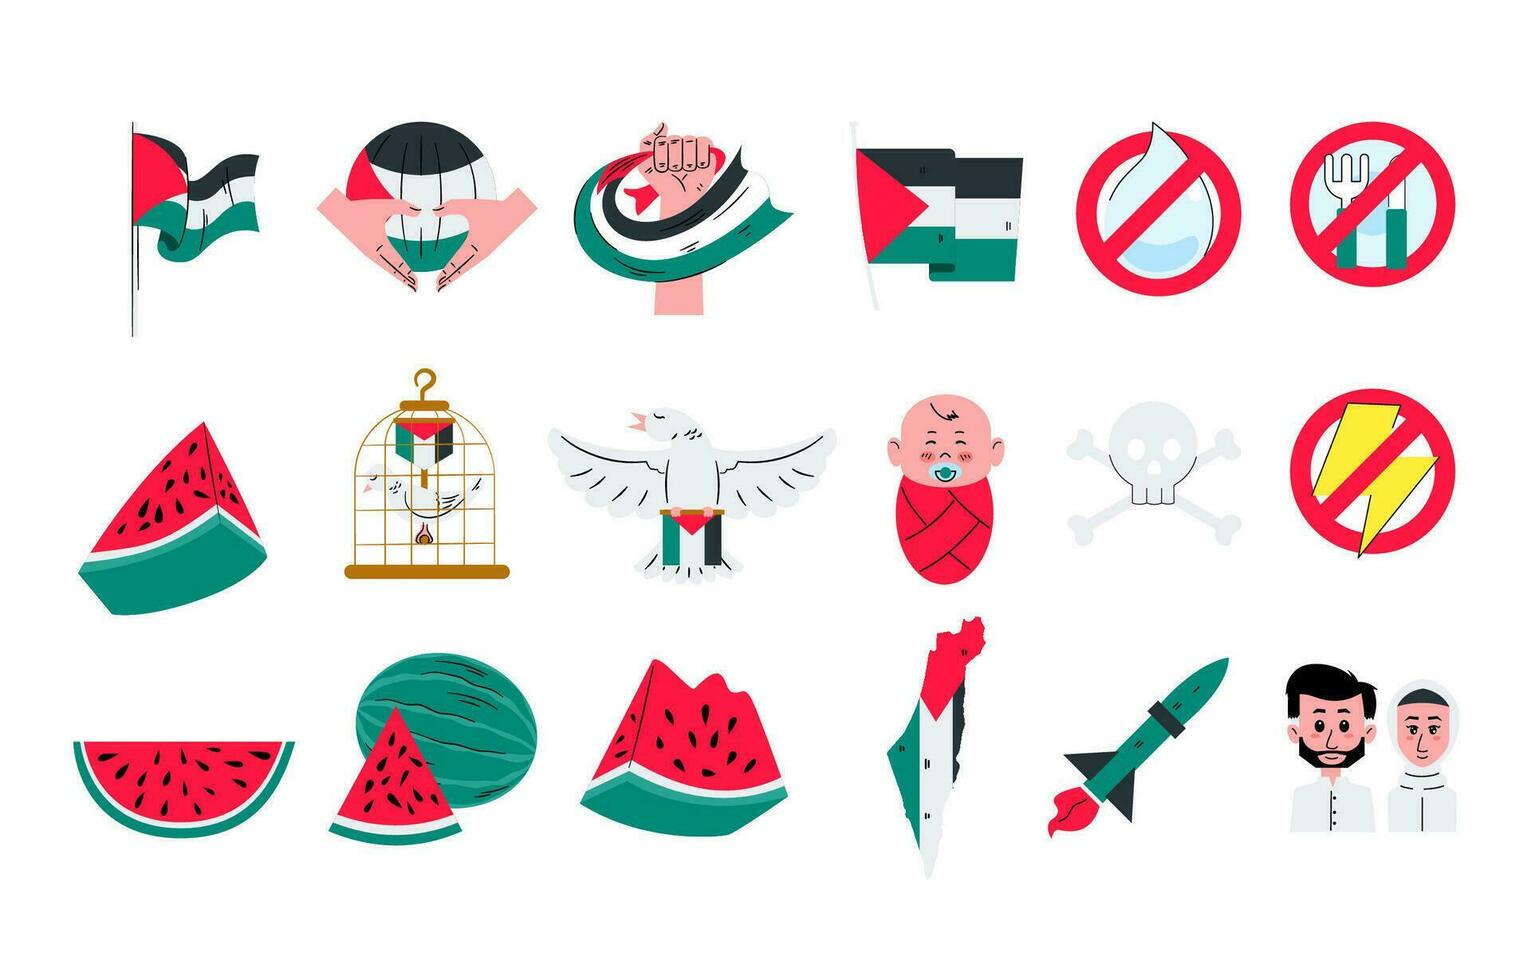 Palestine flag and culture of palestinian sticker for decoration social media element design, watermelon as symbol of palestine vector